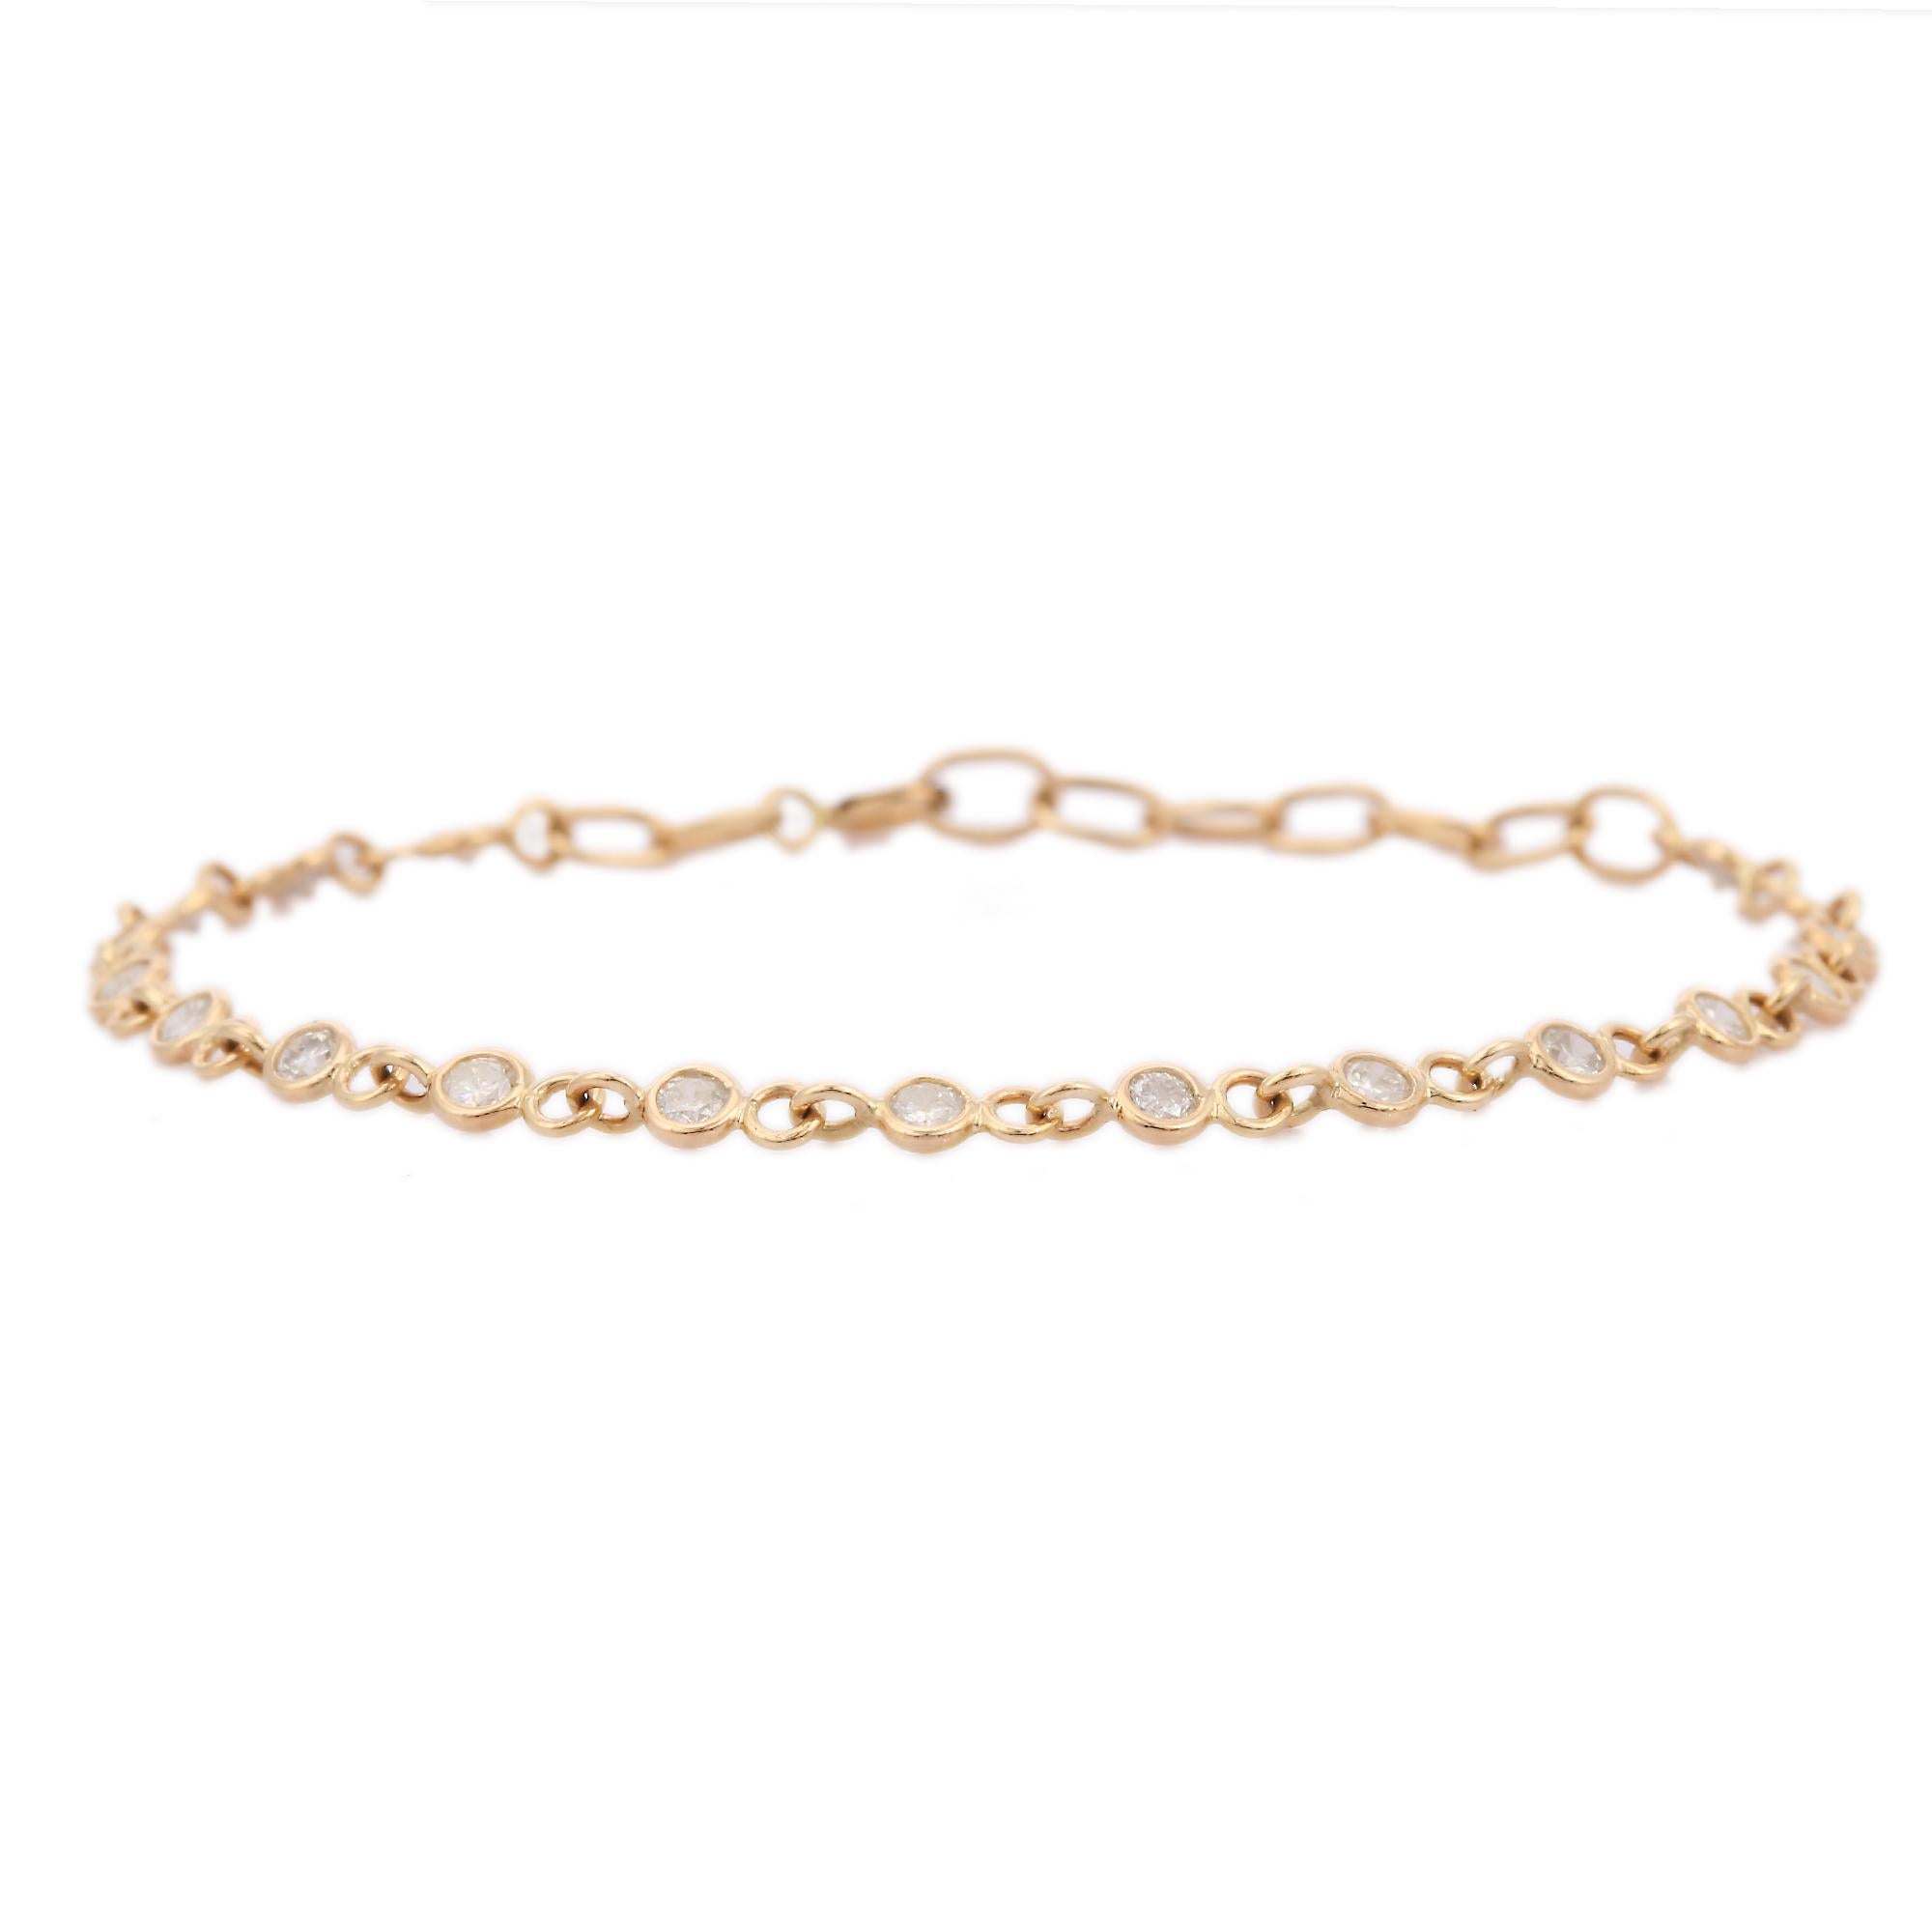 Bracelets are worn to enhance the look. Women love to look good. It is common to see a woman rocking a lovely gold bracelet on her wrist. A gold diamond bracelet is the ultimate statement piece for every stylish woman.
April birthstone diamond